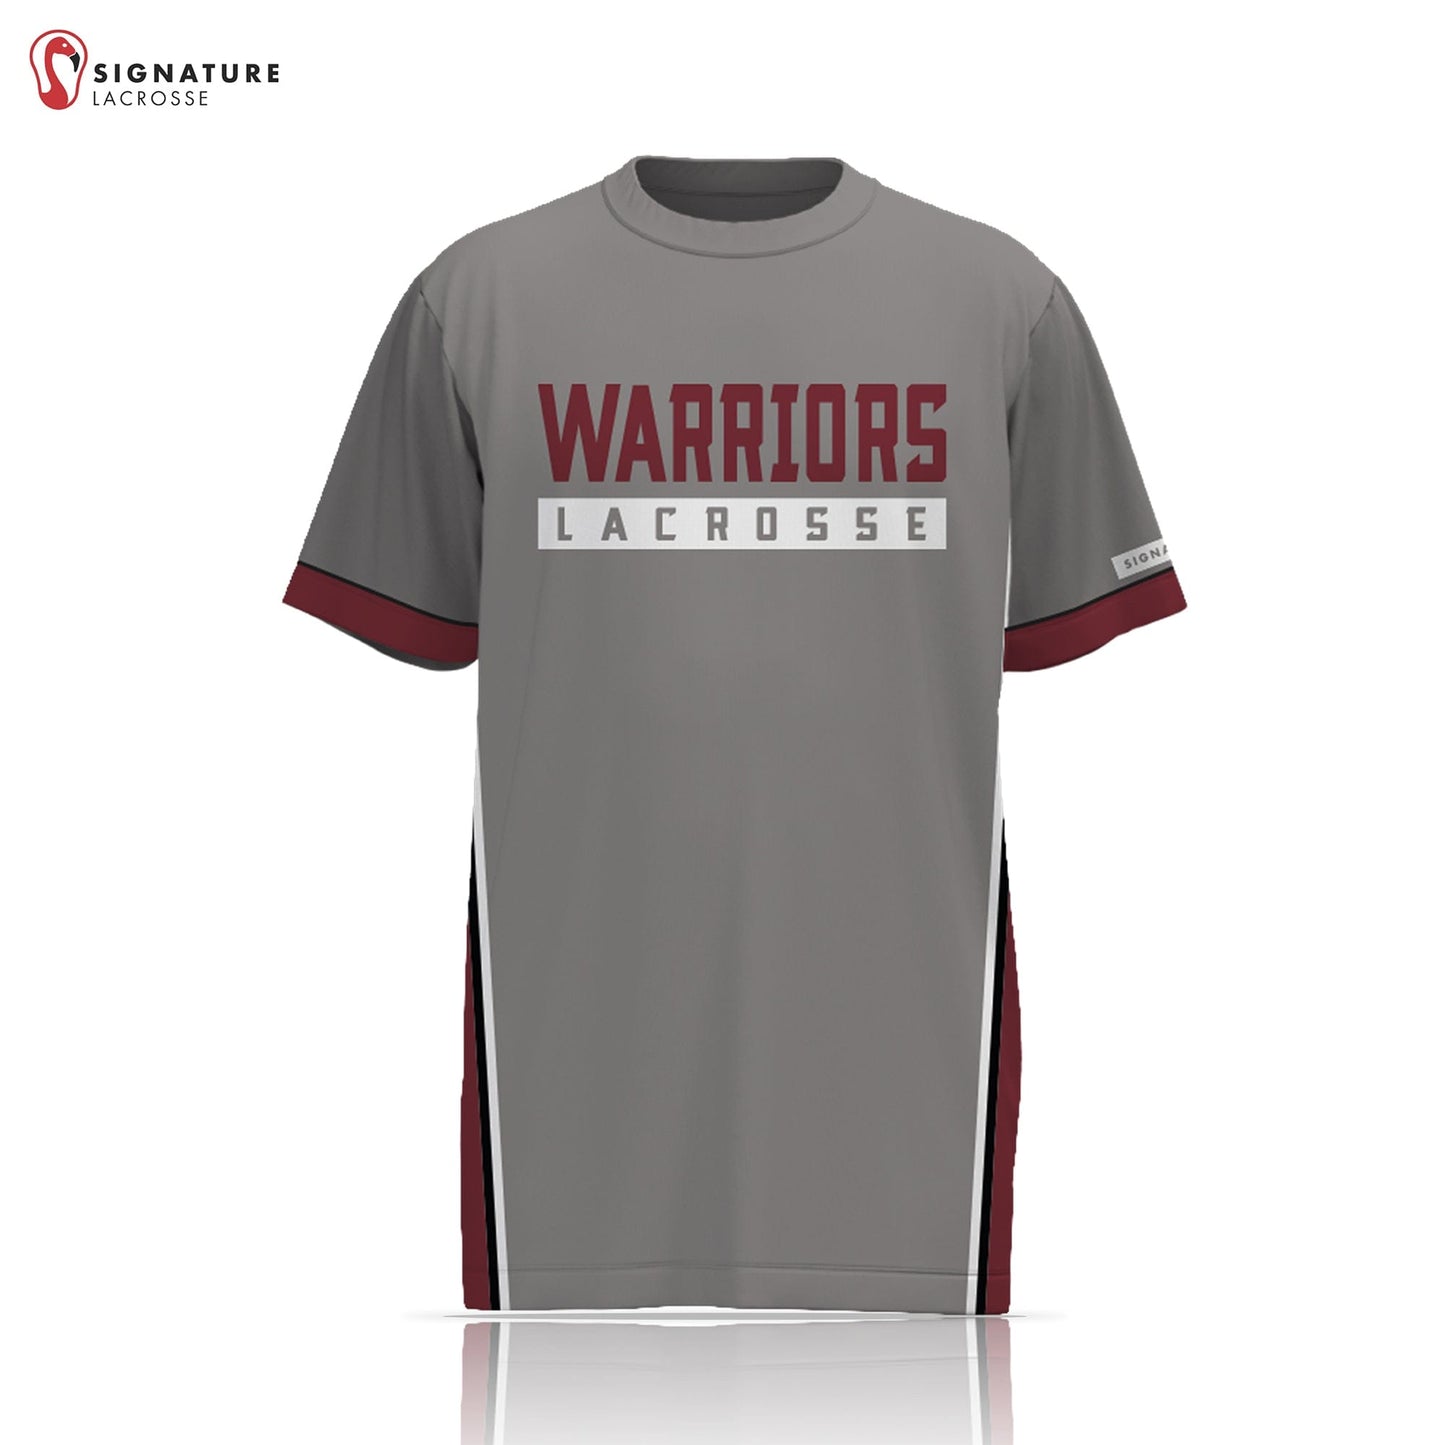 State College Player Short Sleeve Shooter Shirt: 7-8 Signature Lacrosse